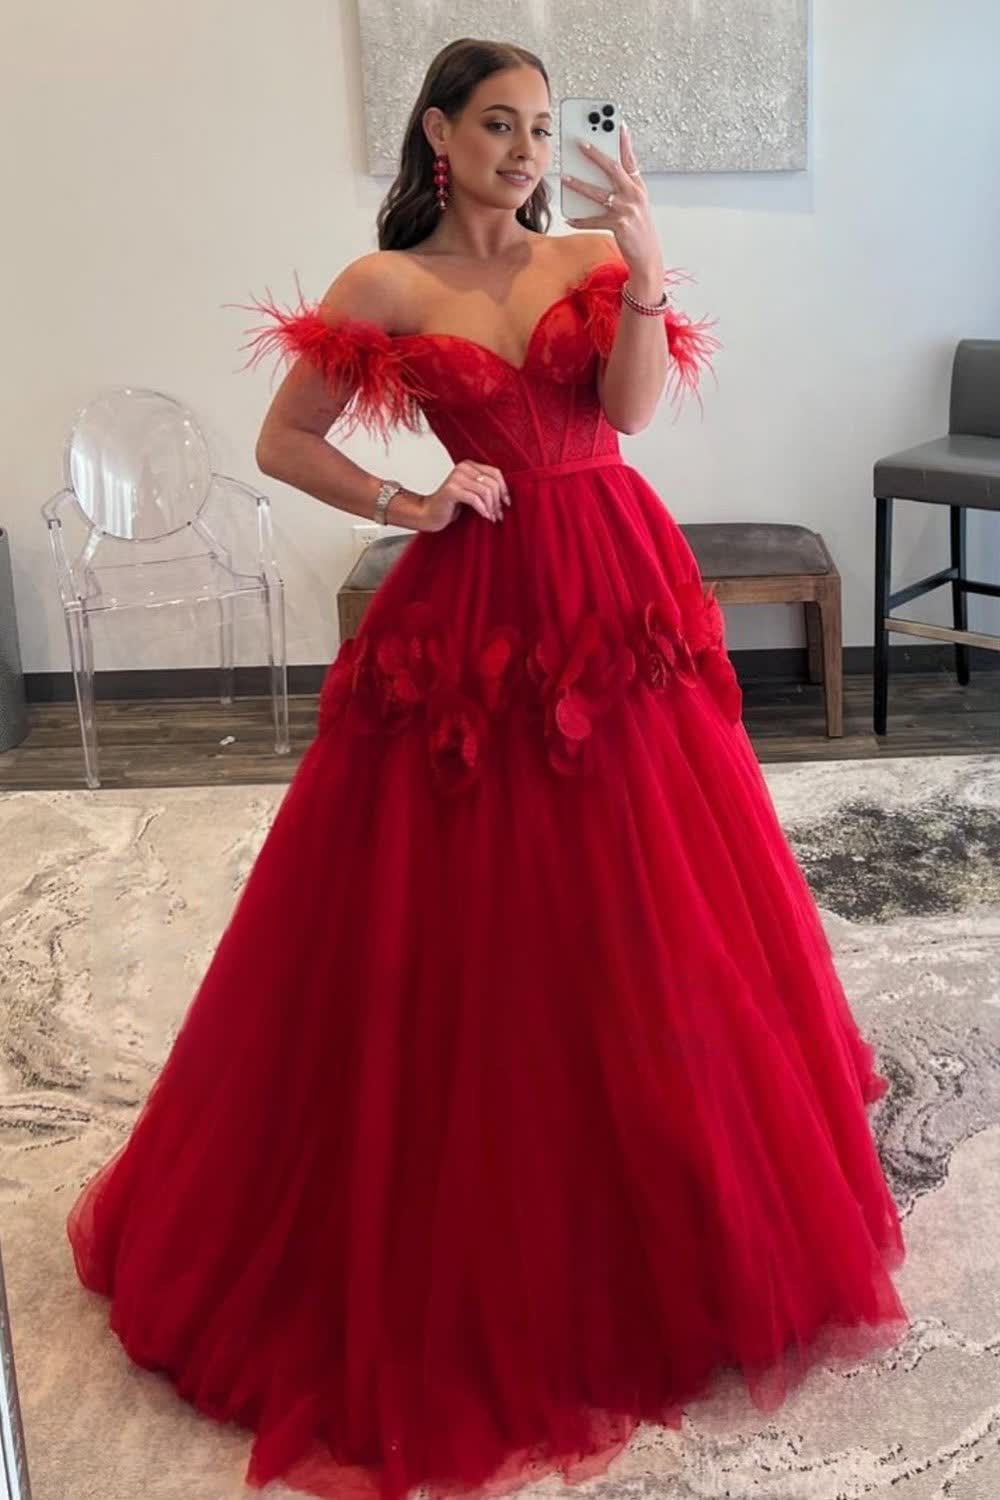 Red A-Line Corset Long Corset Prom Dress with 3D Flowers outfit, Red A-Line Corset Long Prom Dress with 3D Flowers